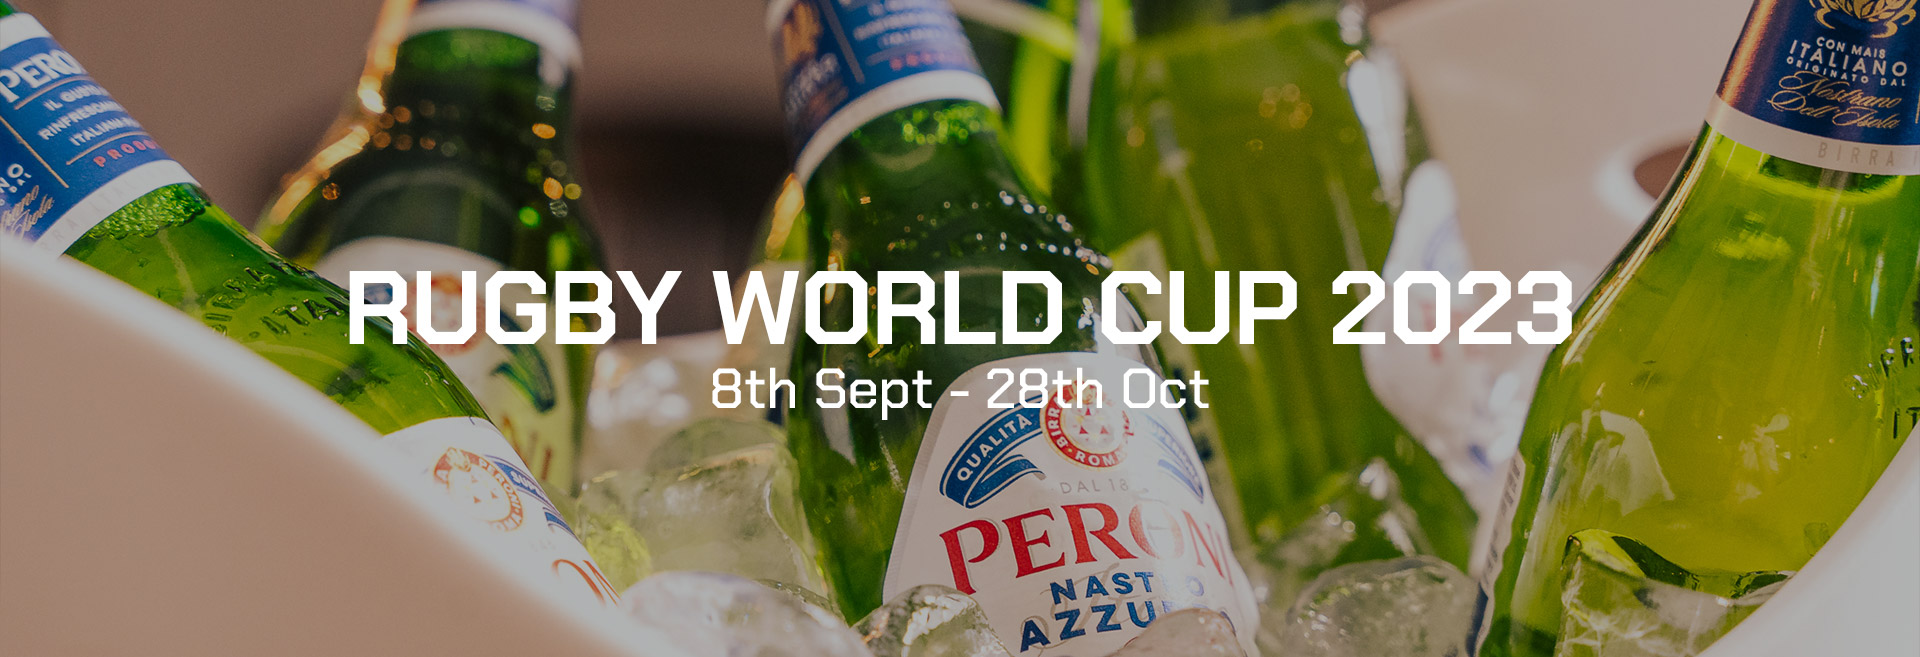 Watch the Rugby World Cup at The Phoenix Cavendish Square